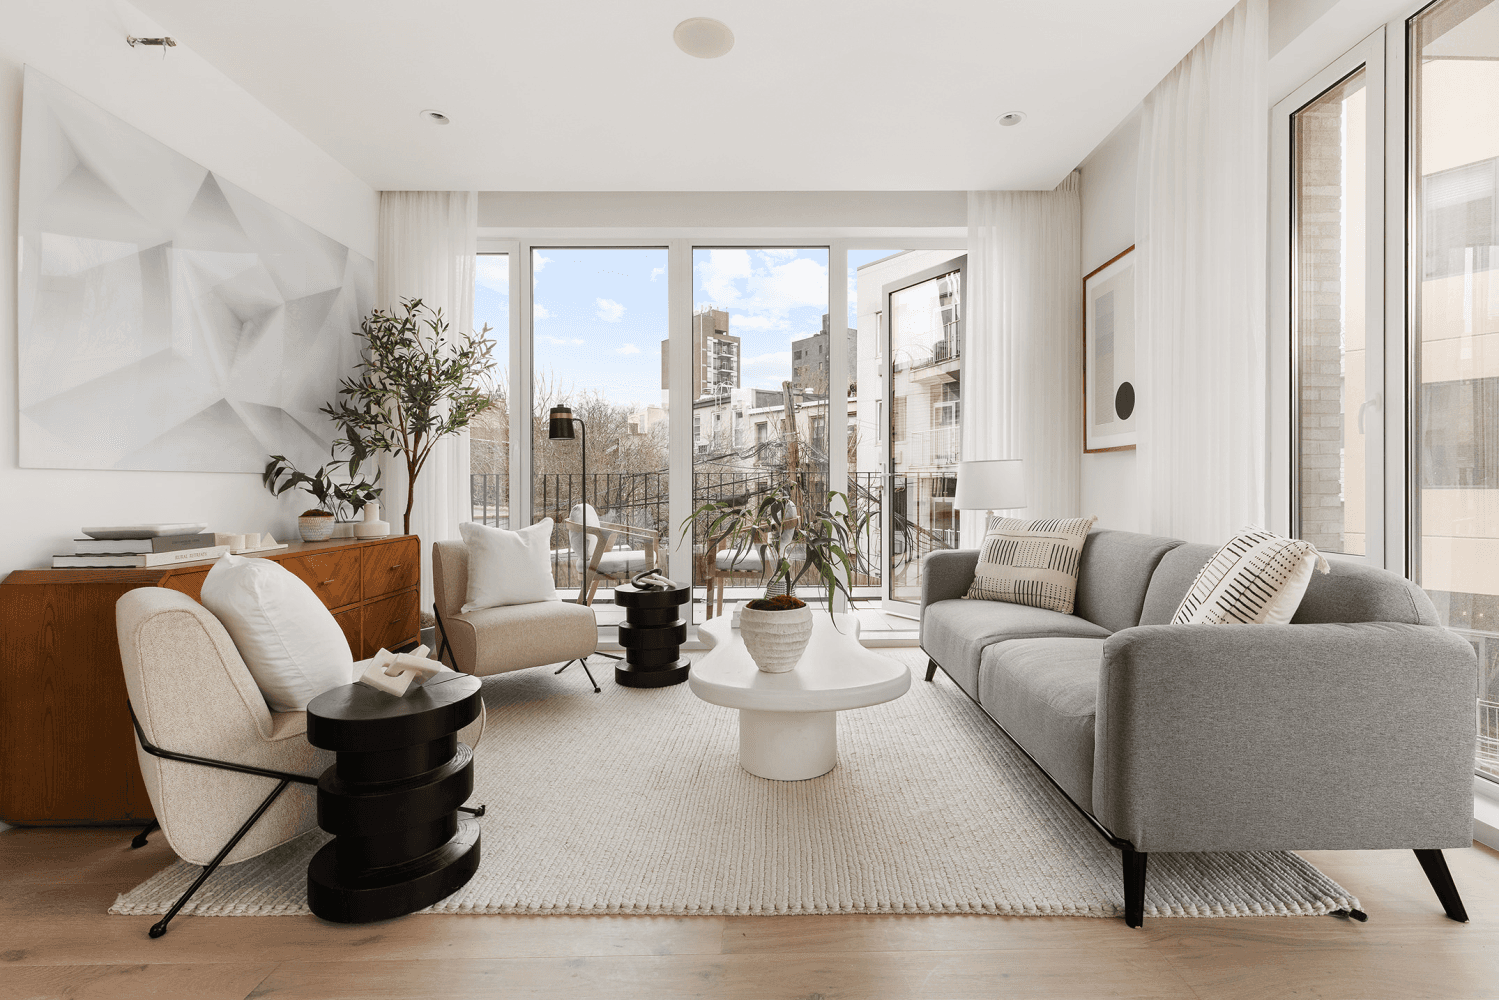 Welcome to this exquisite full floor condo with 2 bedrooms, 2 bathrooms, and 2 private balconies at The Woodpoint in Williamsburg.